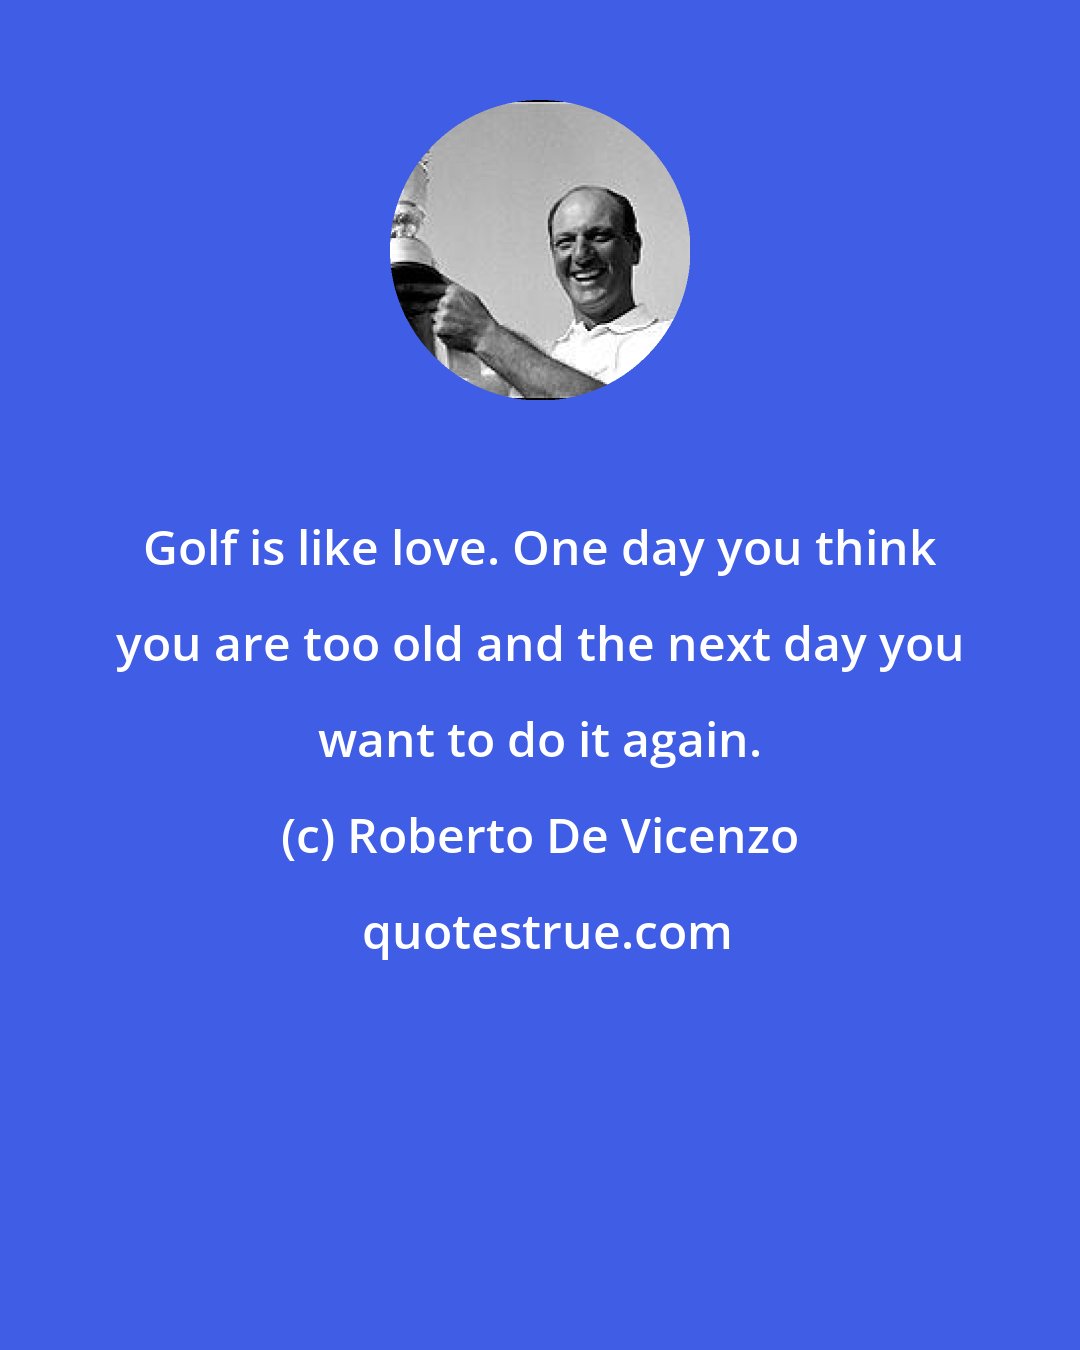 Roberto De Vicenzo: Golf is like love. One day you think you are too old and the next day you want to do it again.